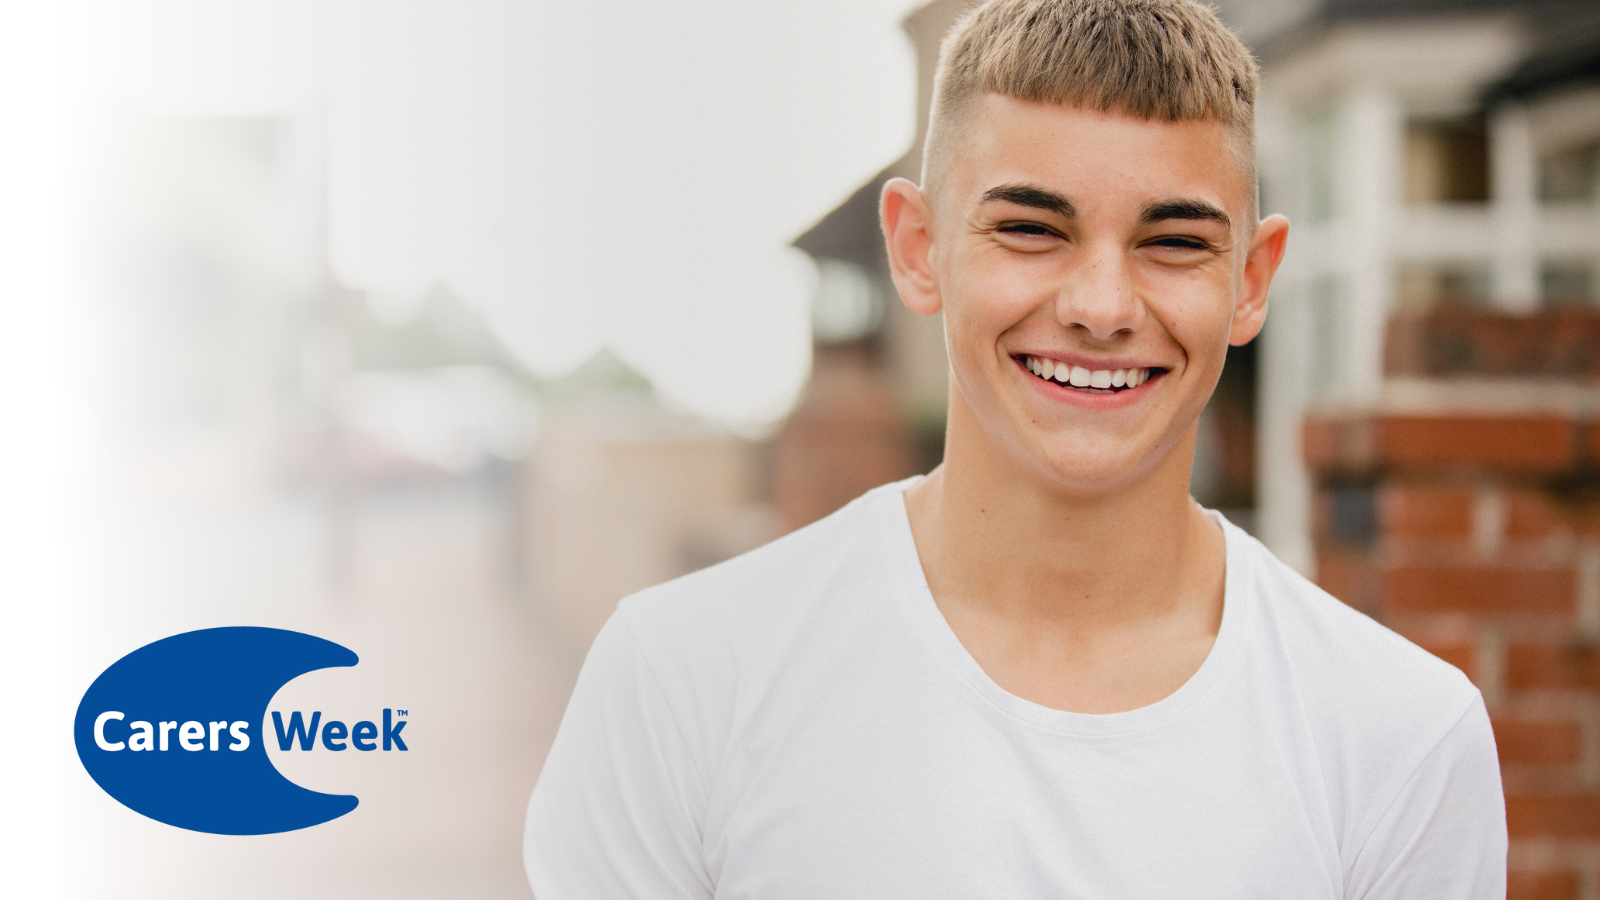 A young male adult wearing a white t-shirt smiling in the street with the carers week logo on.